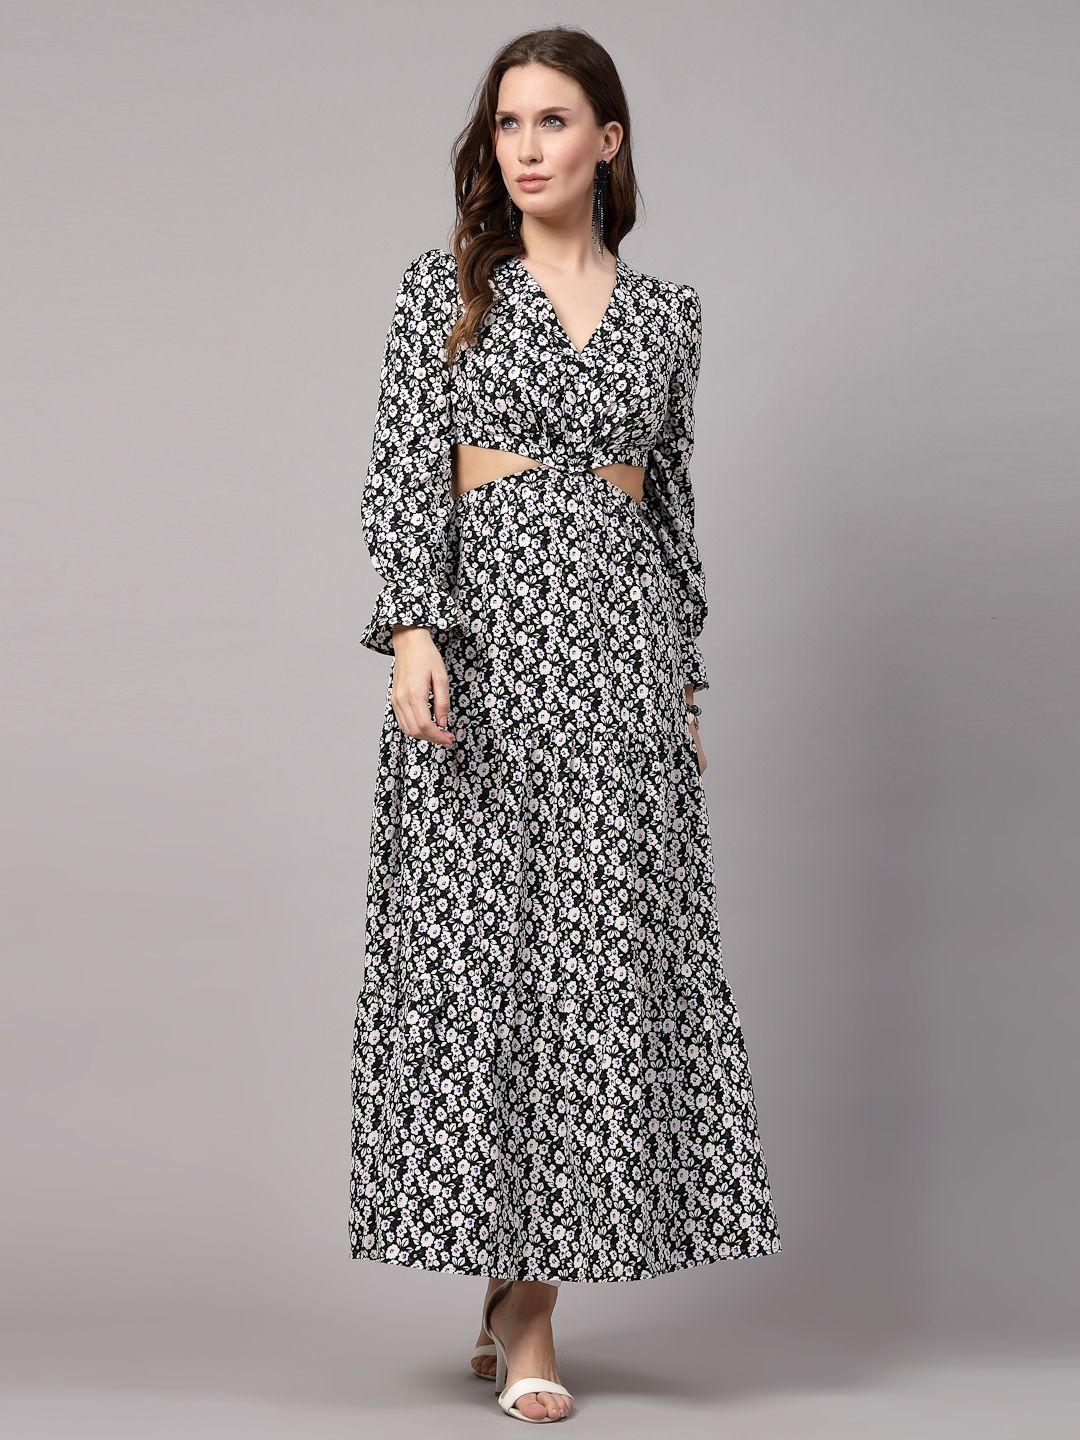 aayu Floral Printed V-Neck Bell Sleeve Maxi Dress